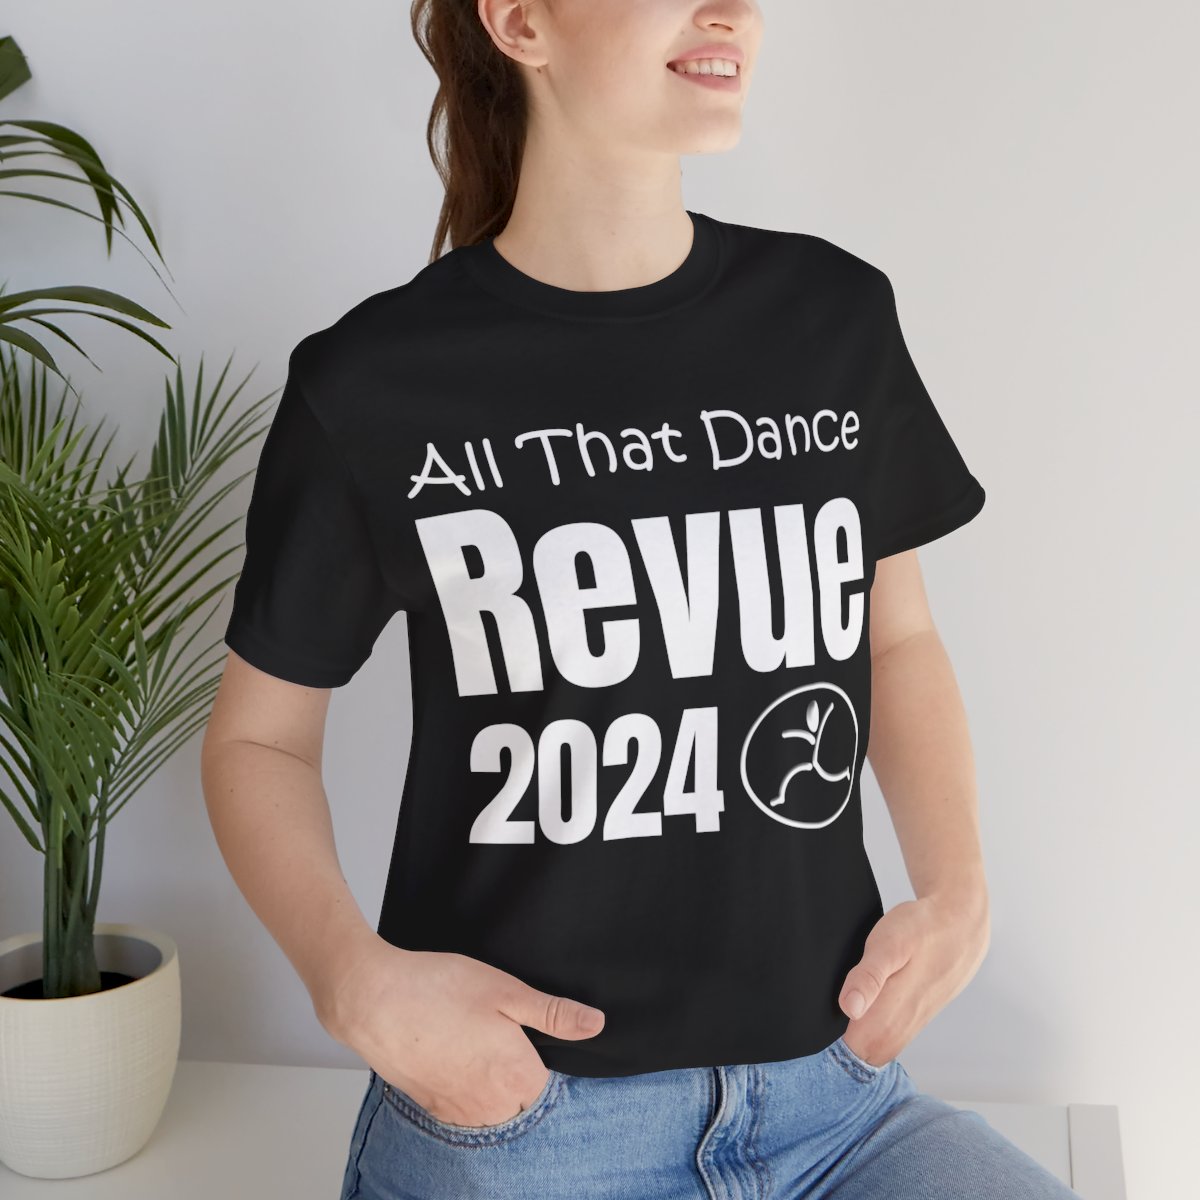 Adult Sizes - Two Sided All That Dance Revue 2023 Tshirt with Names on Back product thumbnail image